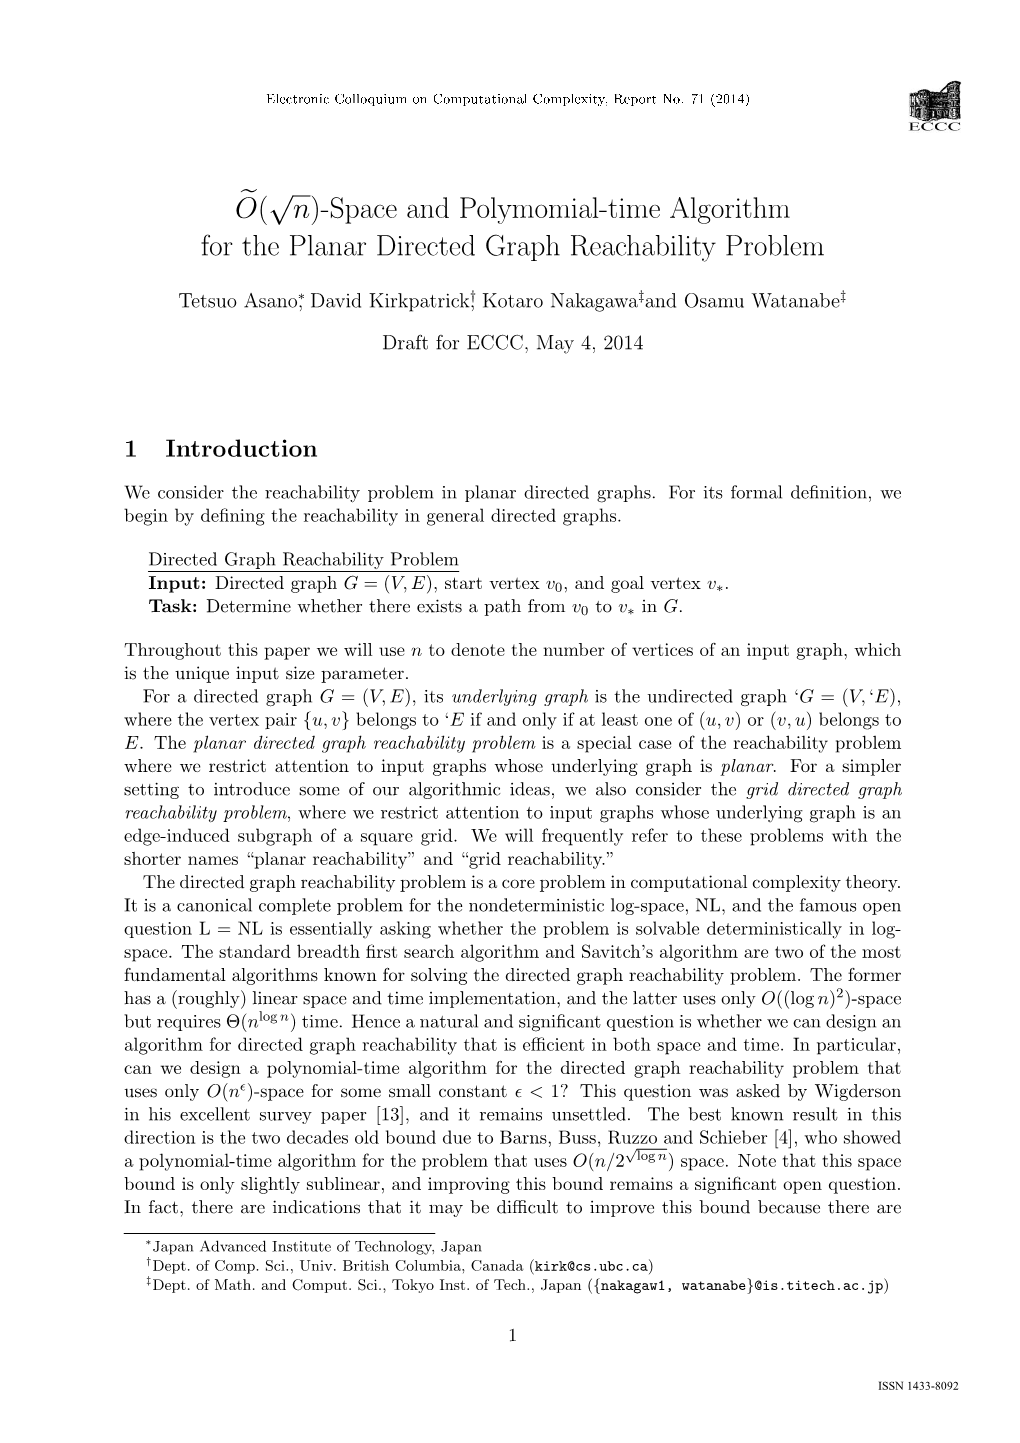 Space and Polymomial-Time Algorithm for the Planar Directed Graph Reachability Problem